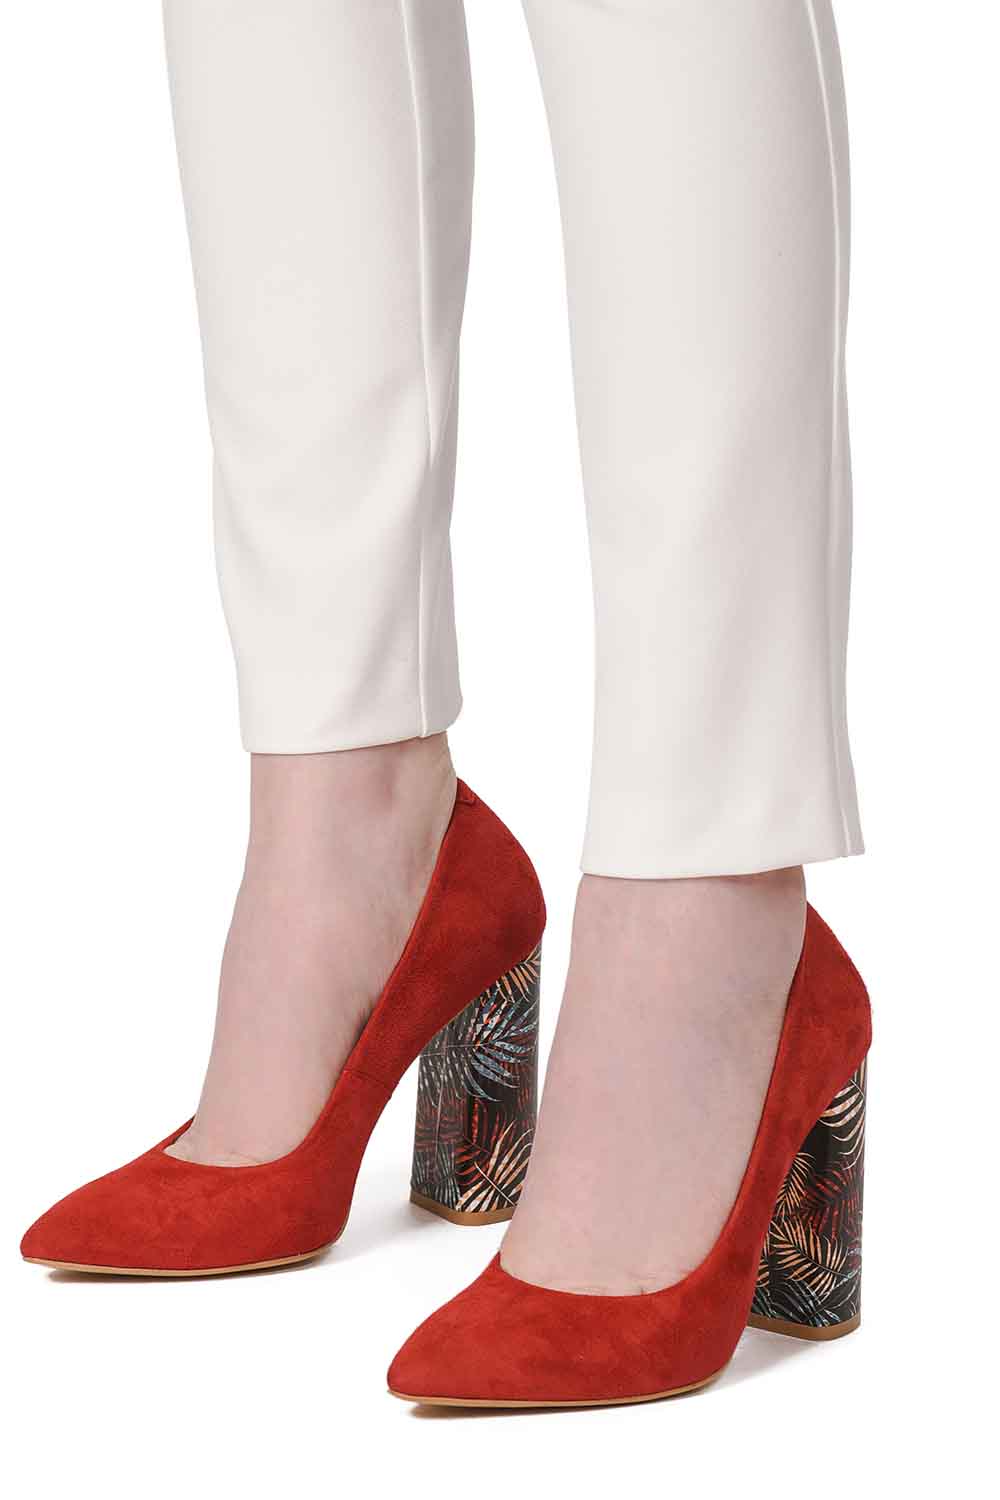 Patterned Thick Heeled Leather Shoes (Orange-Red)